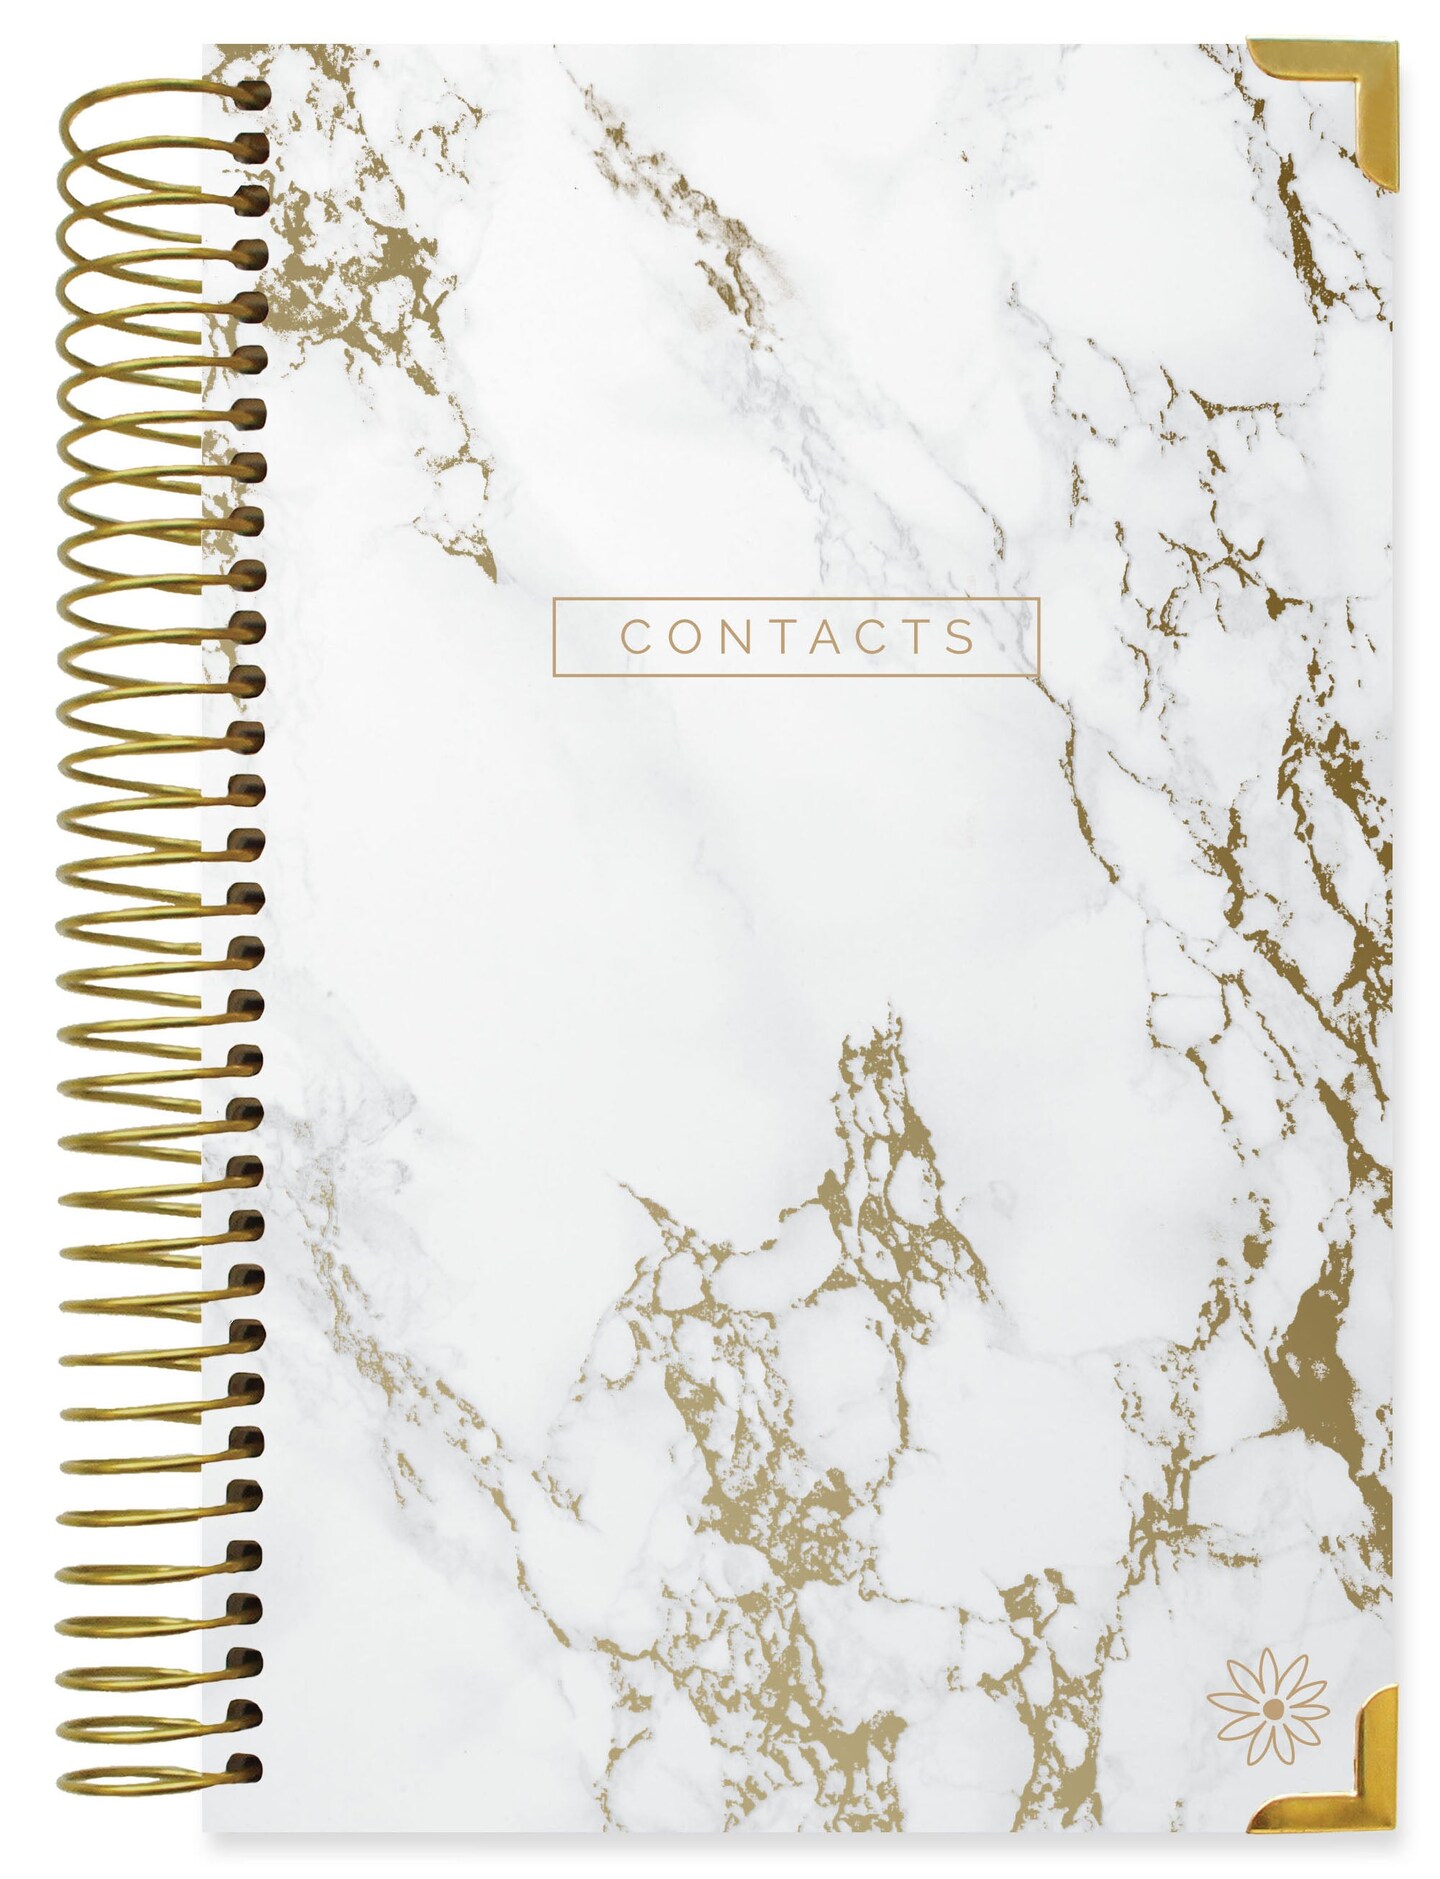 bloom daily planners Contact Book, Marble Gold Stamp